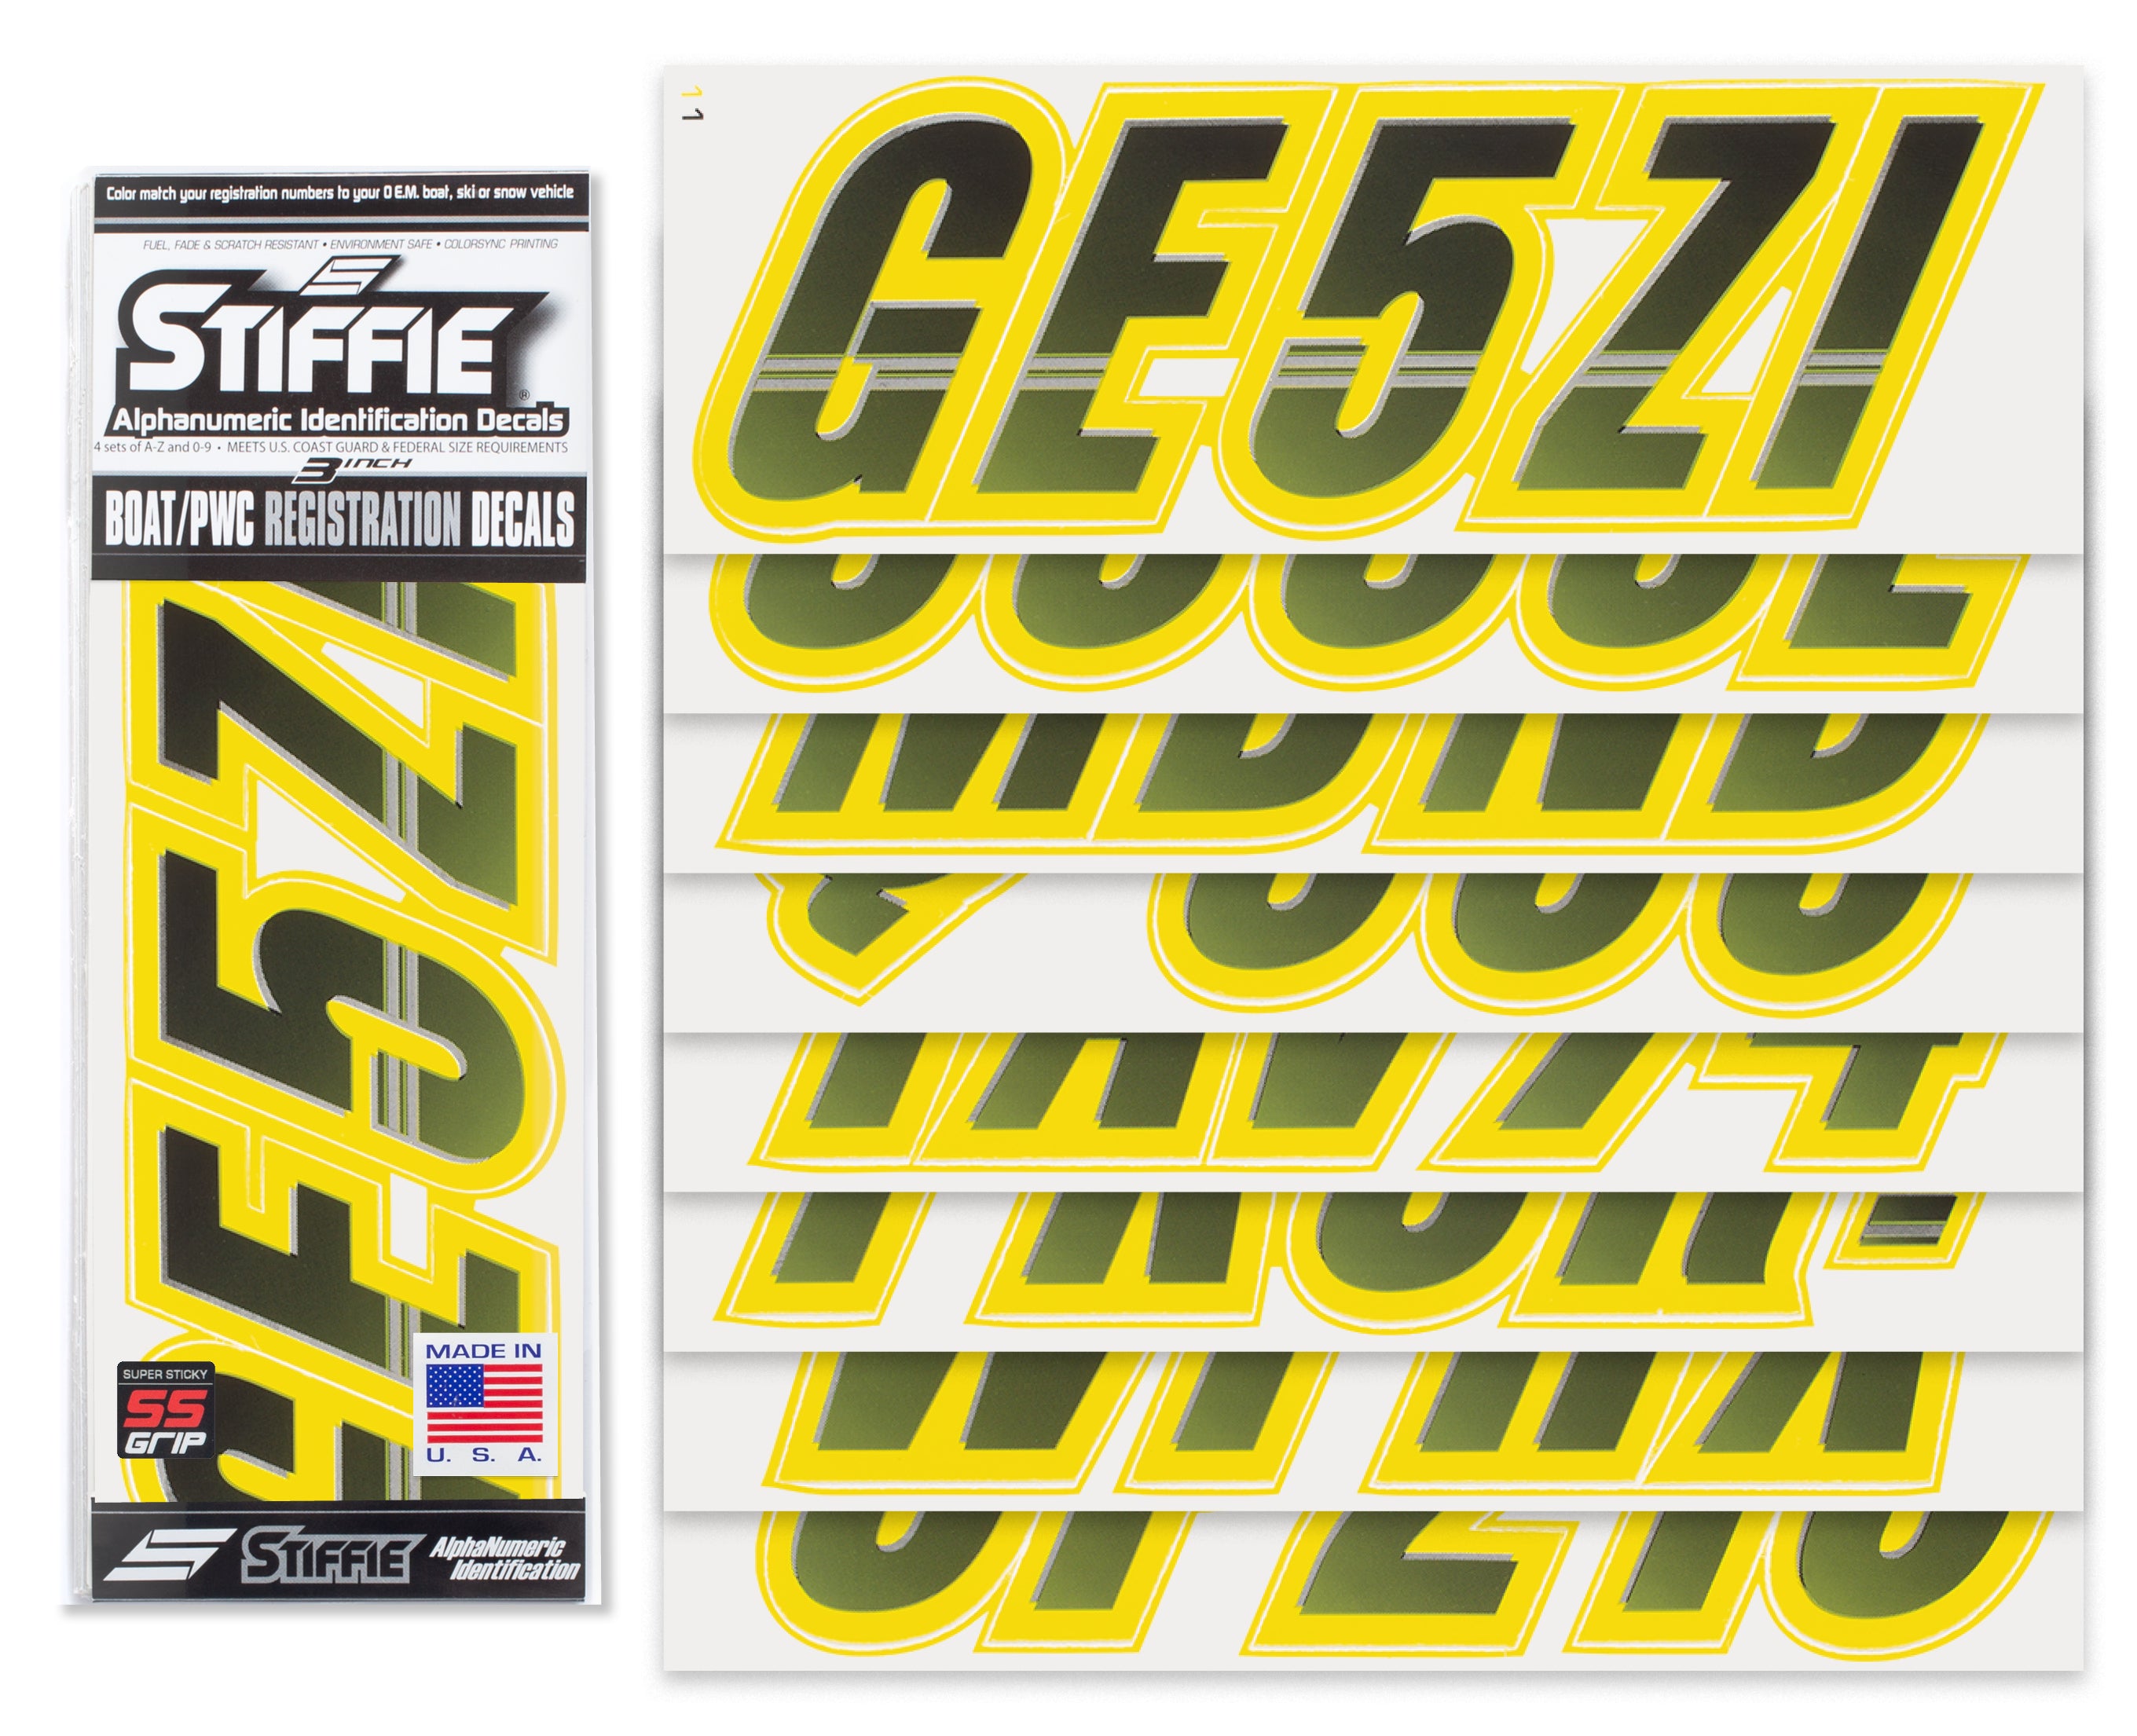 Stiffie Techtron Black/Yellow Crush Super Sticky 3" Alpha Numeric Registration Identification Numbers Stickers Decals for Sea-Doo Spark, Inflatable Boats, Ribs, Hypalon/PVC, PWC and Boats